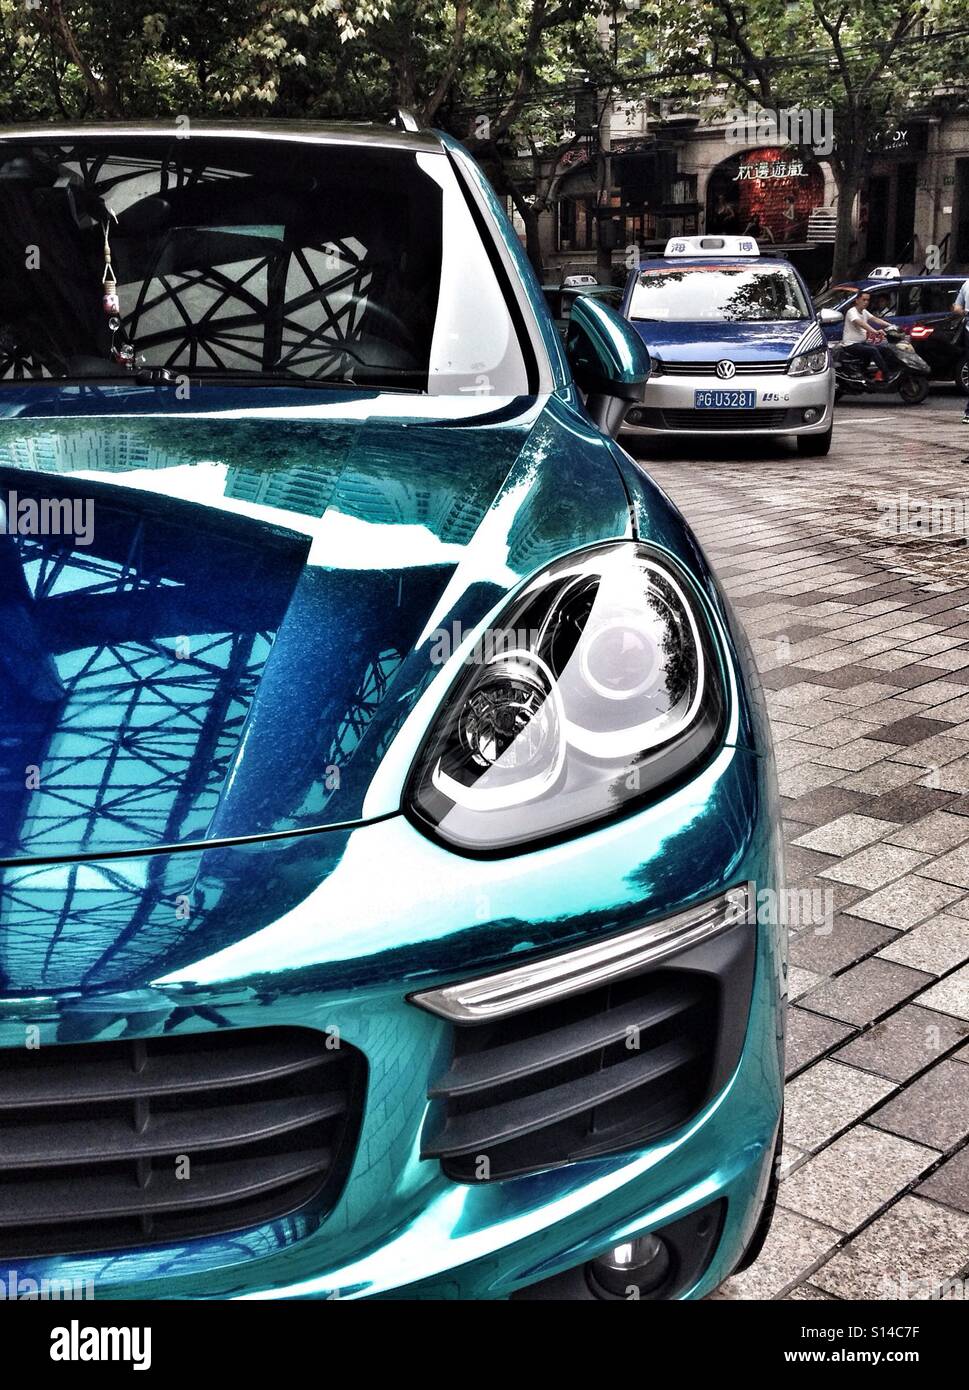 Shiny Parked Light Blue Porsche Car, With Smooth Reflective Surface Stock Photo